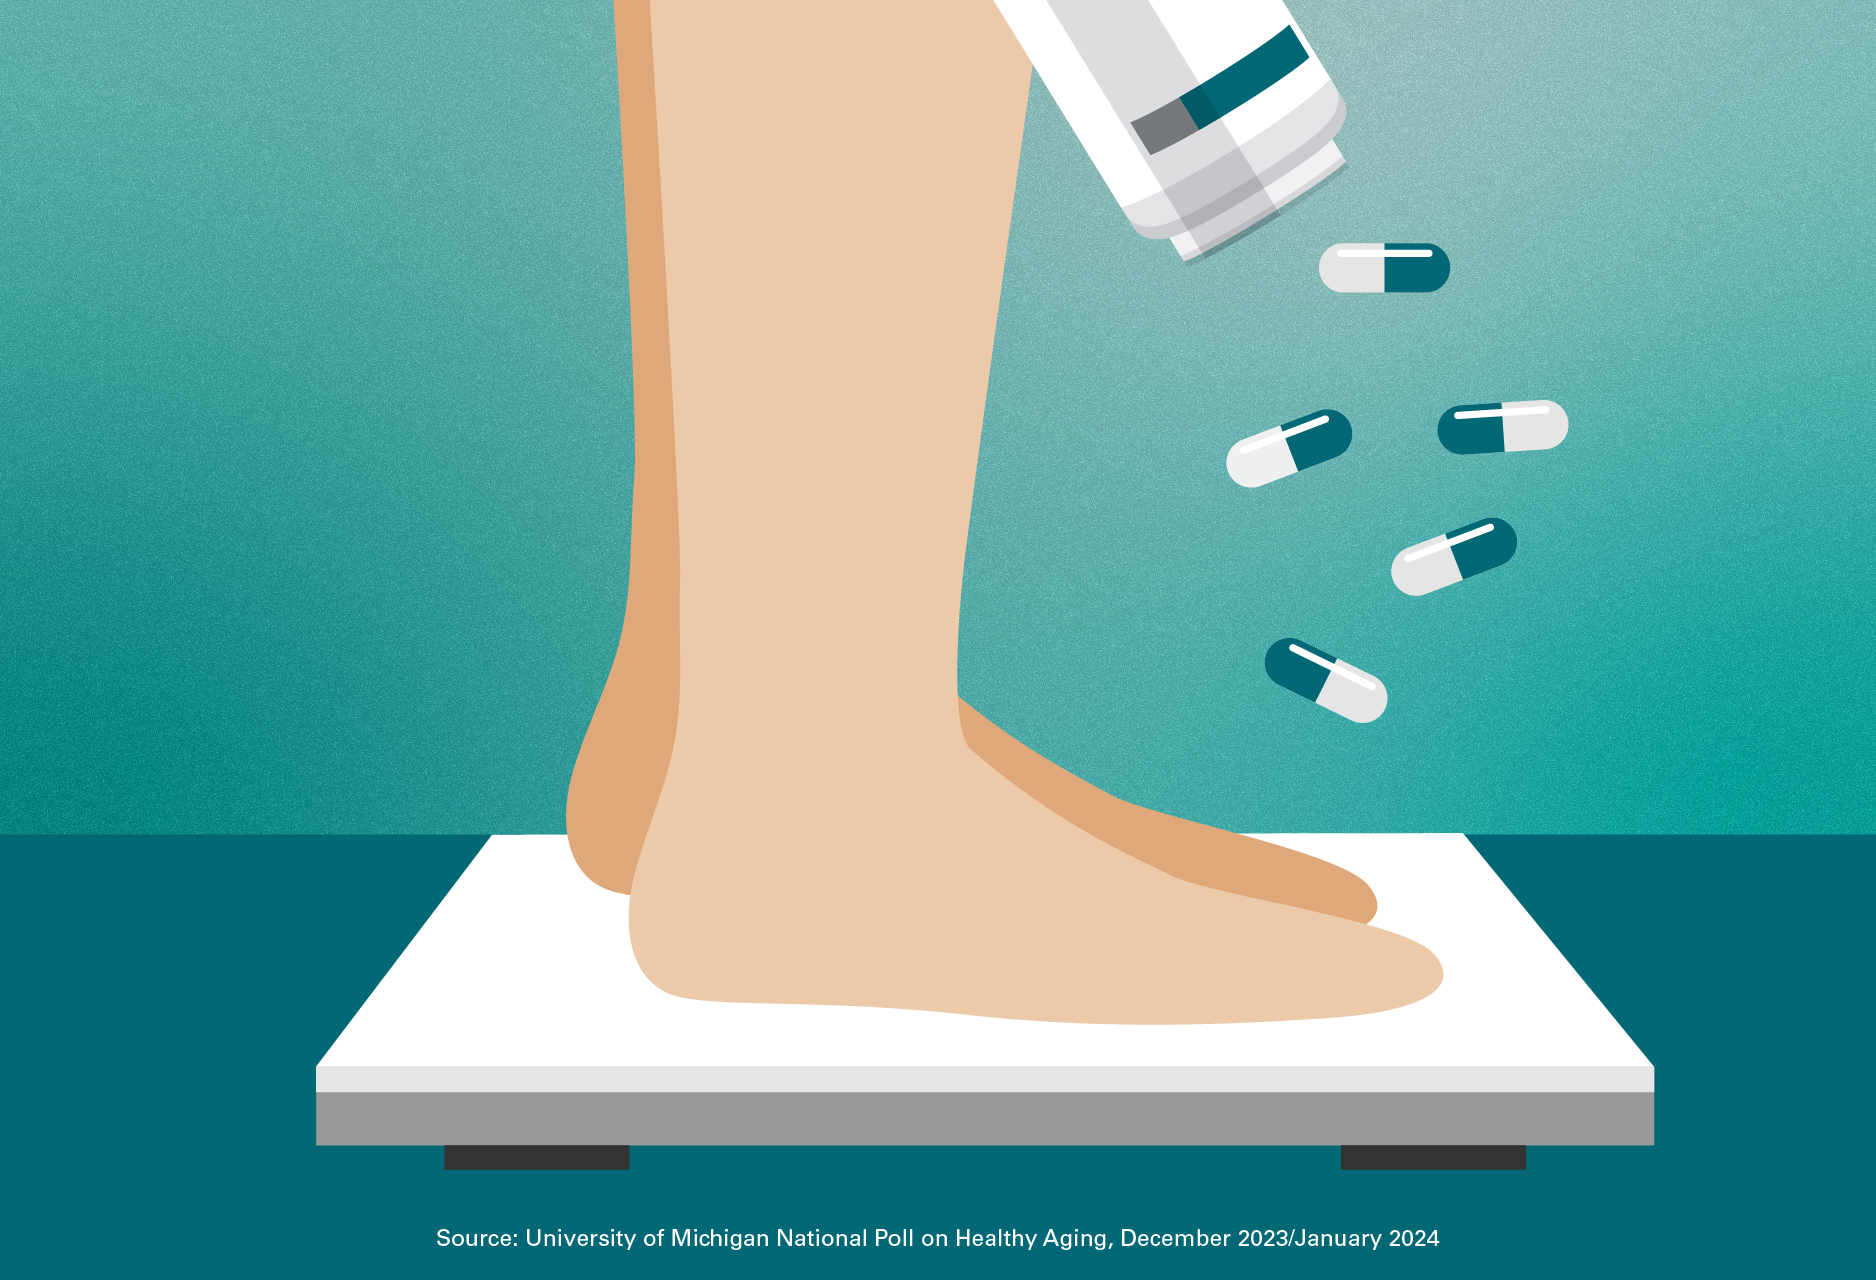 Feet on a scale next to a bottle of pills